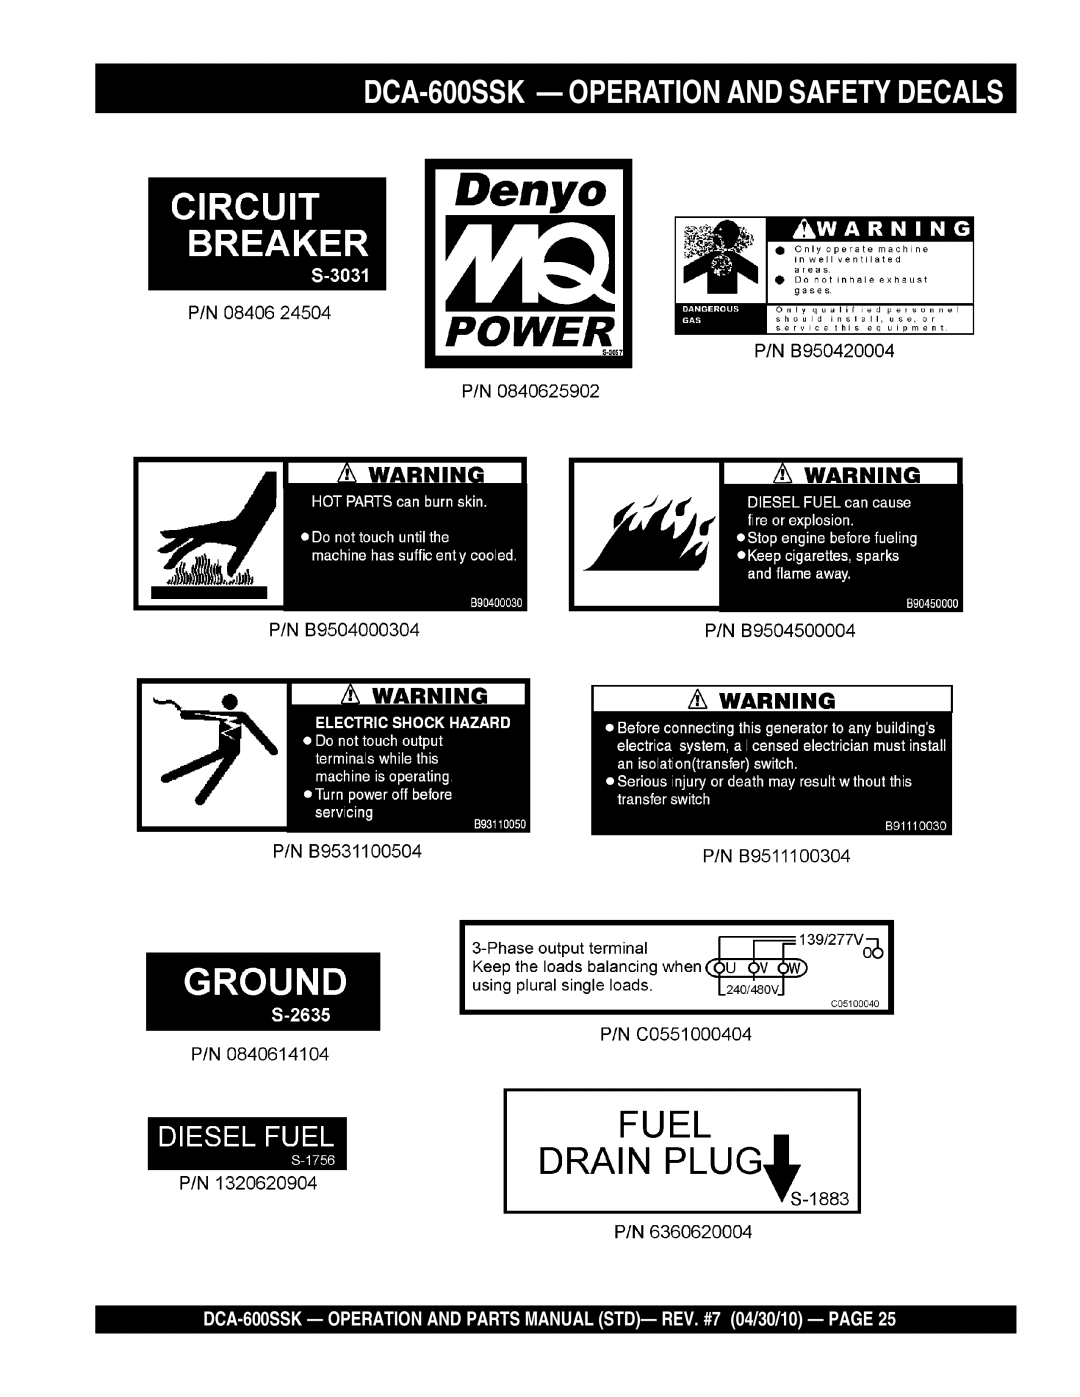 Multiquip operation manual DCA-600SSK - OPERATION AND SAFETY DECALS 